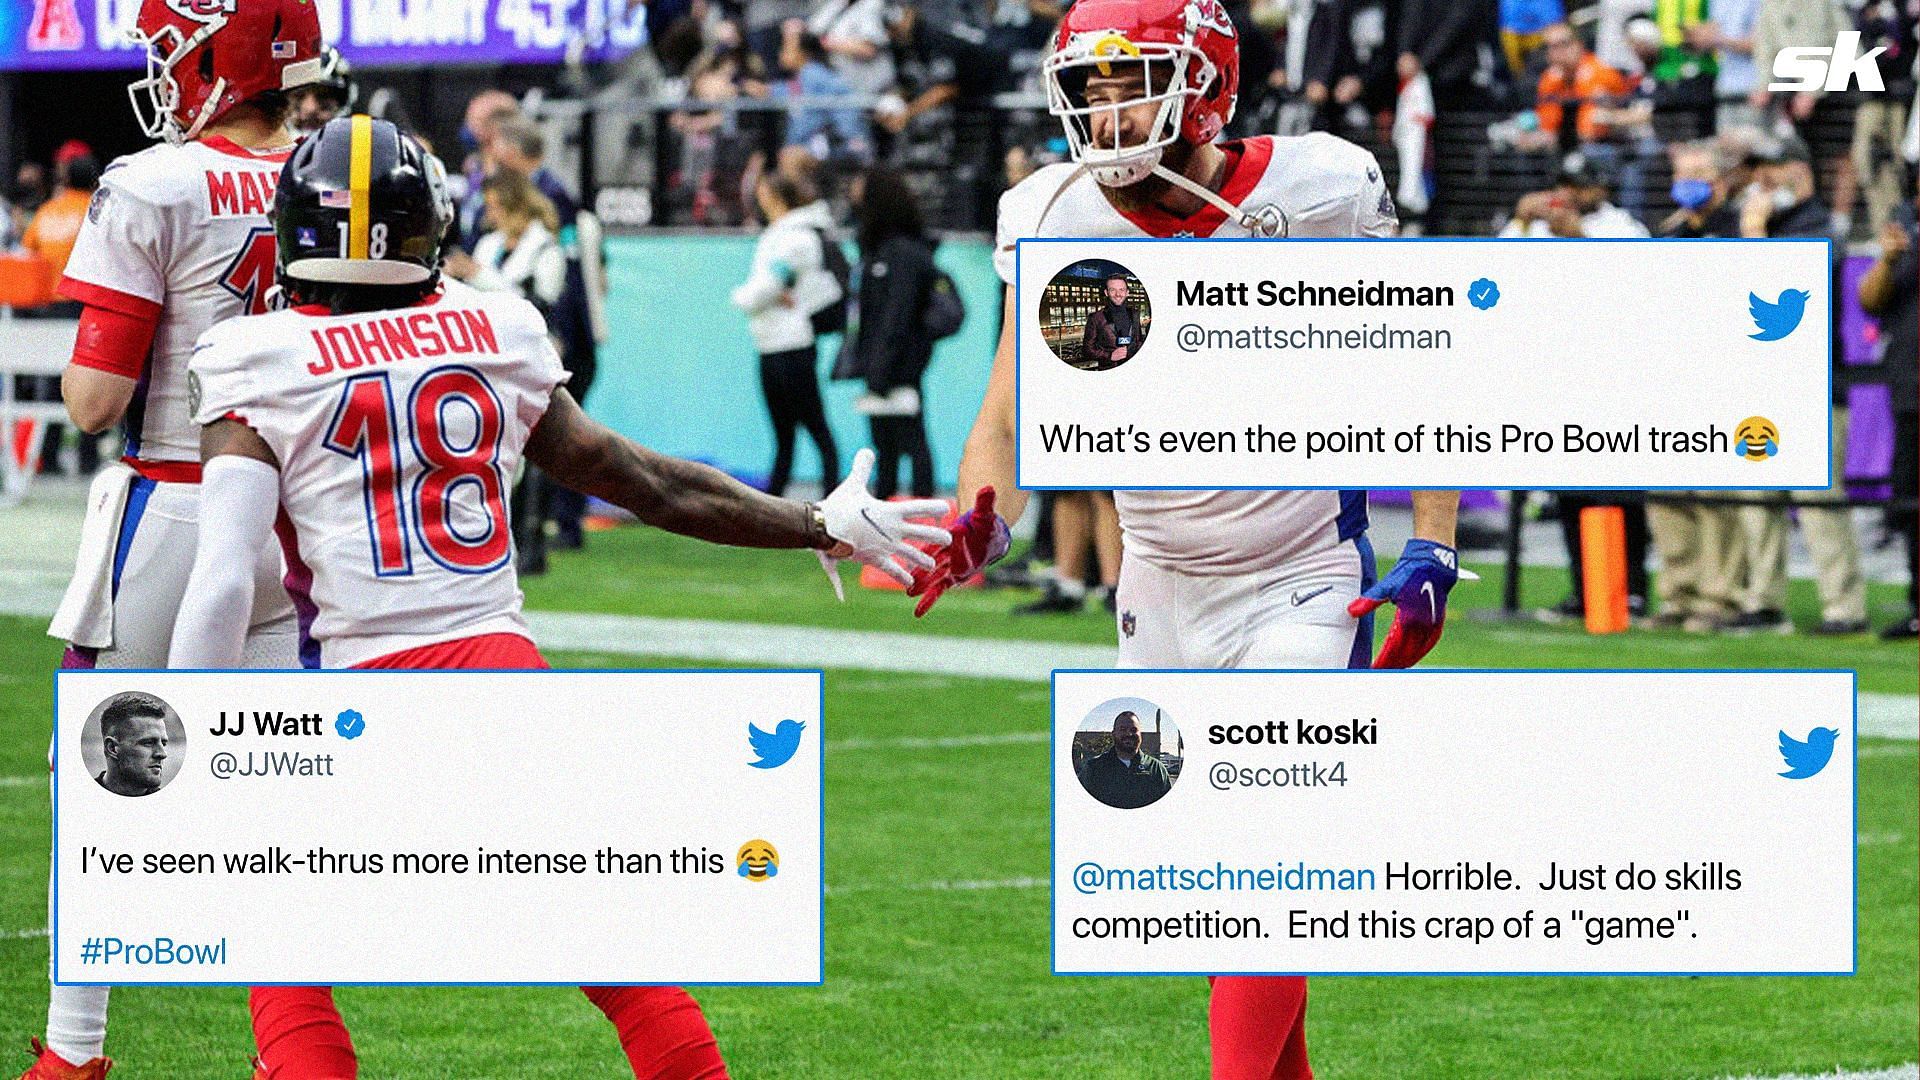 Fans give their honest thoughts on the Pro Bowl